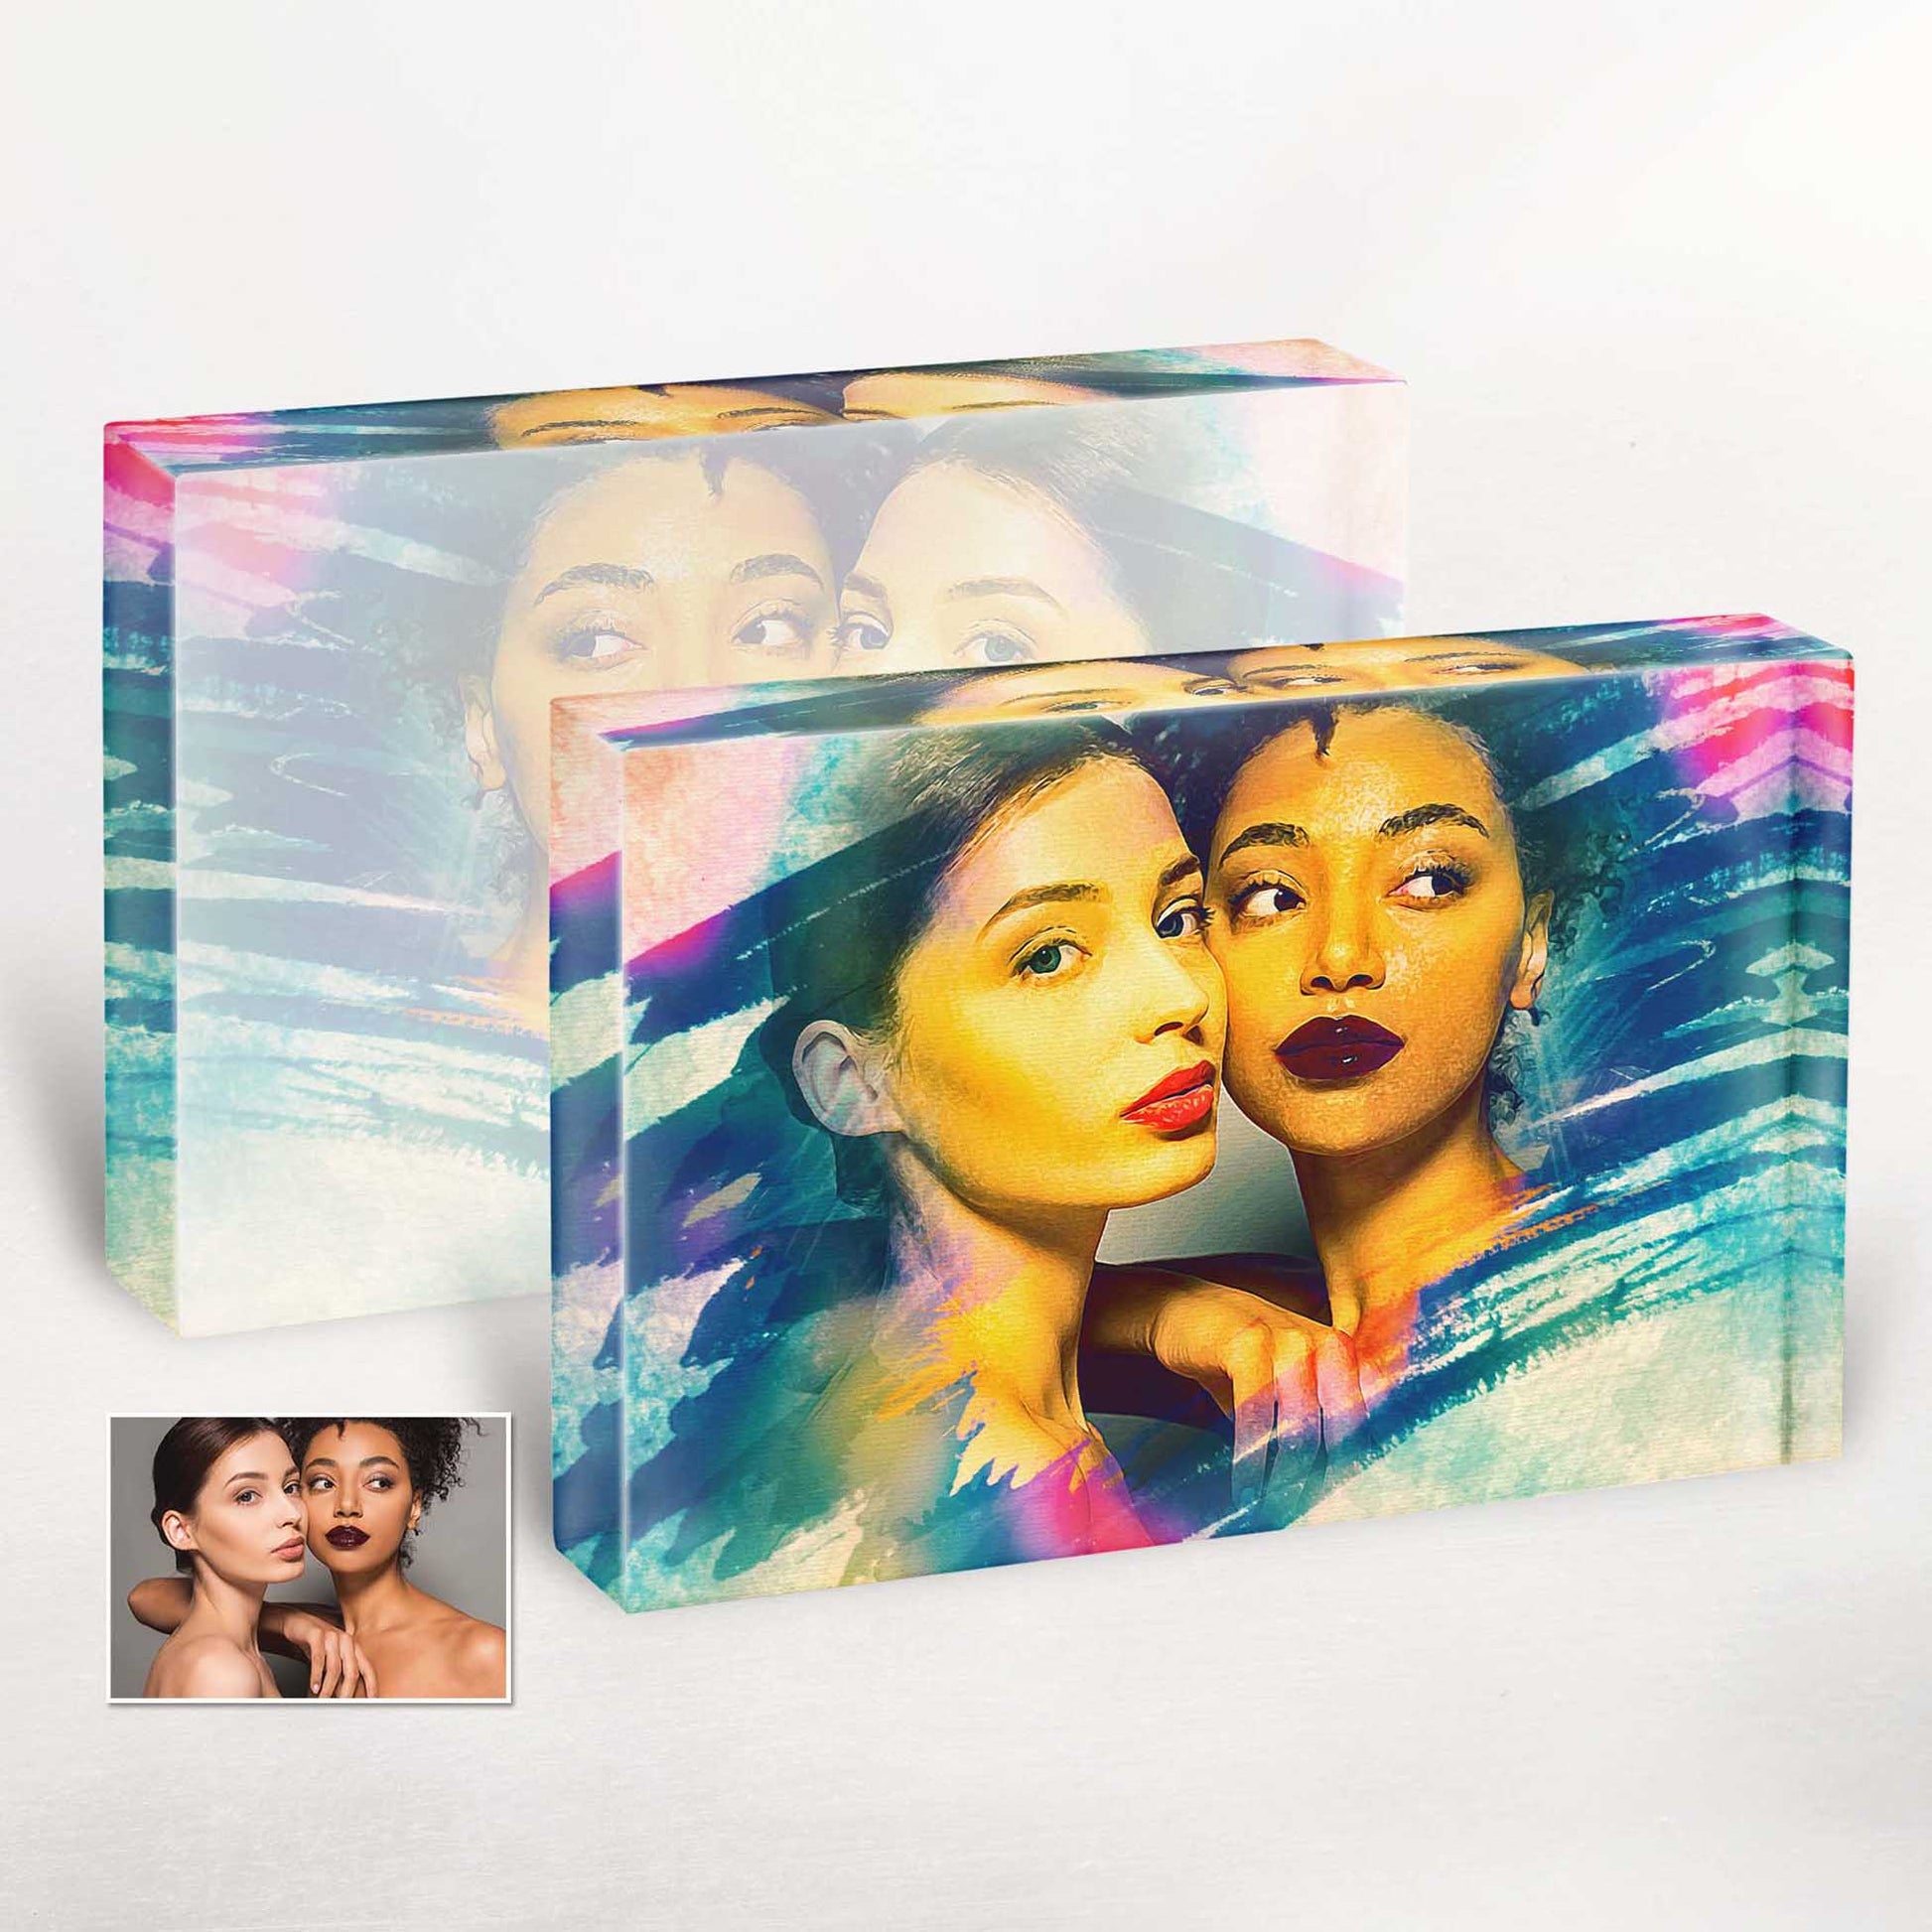 Home Decor Statement: Personalized Artistic Brush Painting Acrylic Block Photo: Make a statement in your home decor with our unique watercolor-inspired acrylic block photo. Its cool and colorful